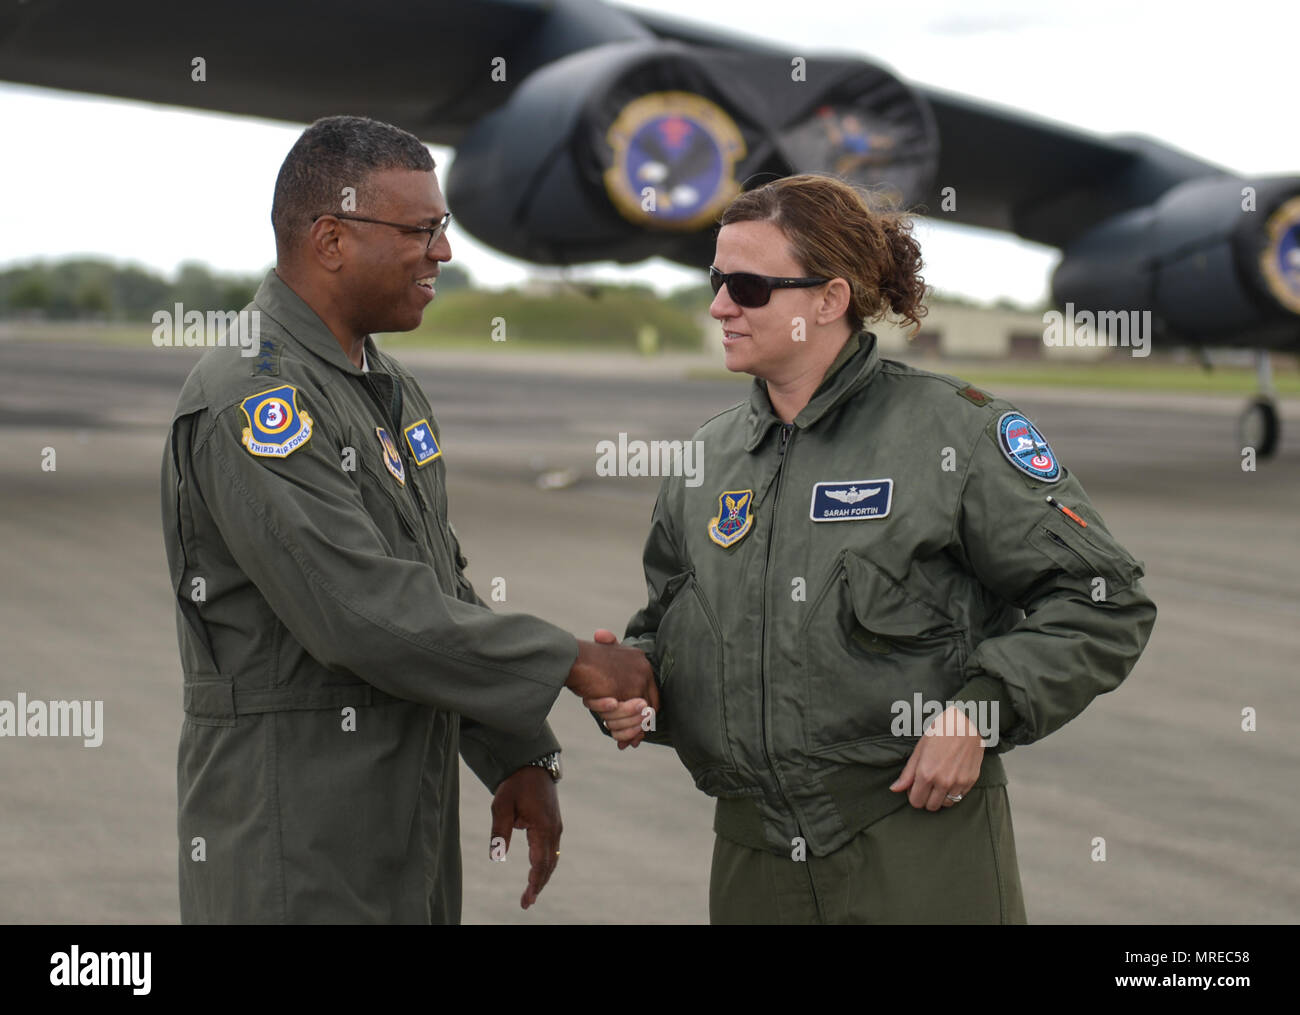 Lt. Gen. Richard Clark, 3rd Air Force commander, shakes the hand of an Air Force Global Strike Command Airman deployed to RAF Fairford, June 12, 2017. The simultaneous deployment of the B-1B Lancer, the B-2 Spirit and the B-52H Stratofortress marked the first time in history that all three strategic bomber aircraft were present in the European Theater. The aircraft were accompanied by approximately 800 Airmen as part of bomber assurance and deterrence operations. (U.S. Air Force photo by Senior Airman Curt Beach) Stock Photo